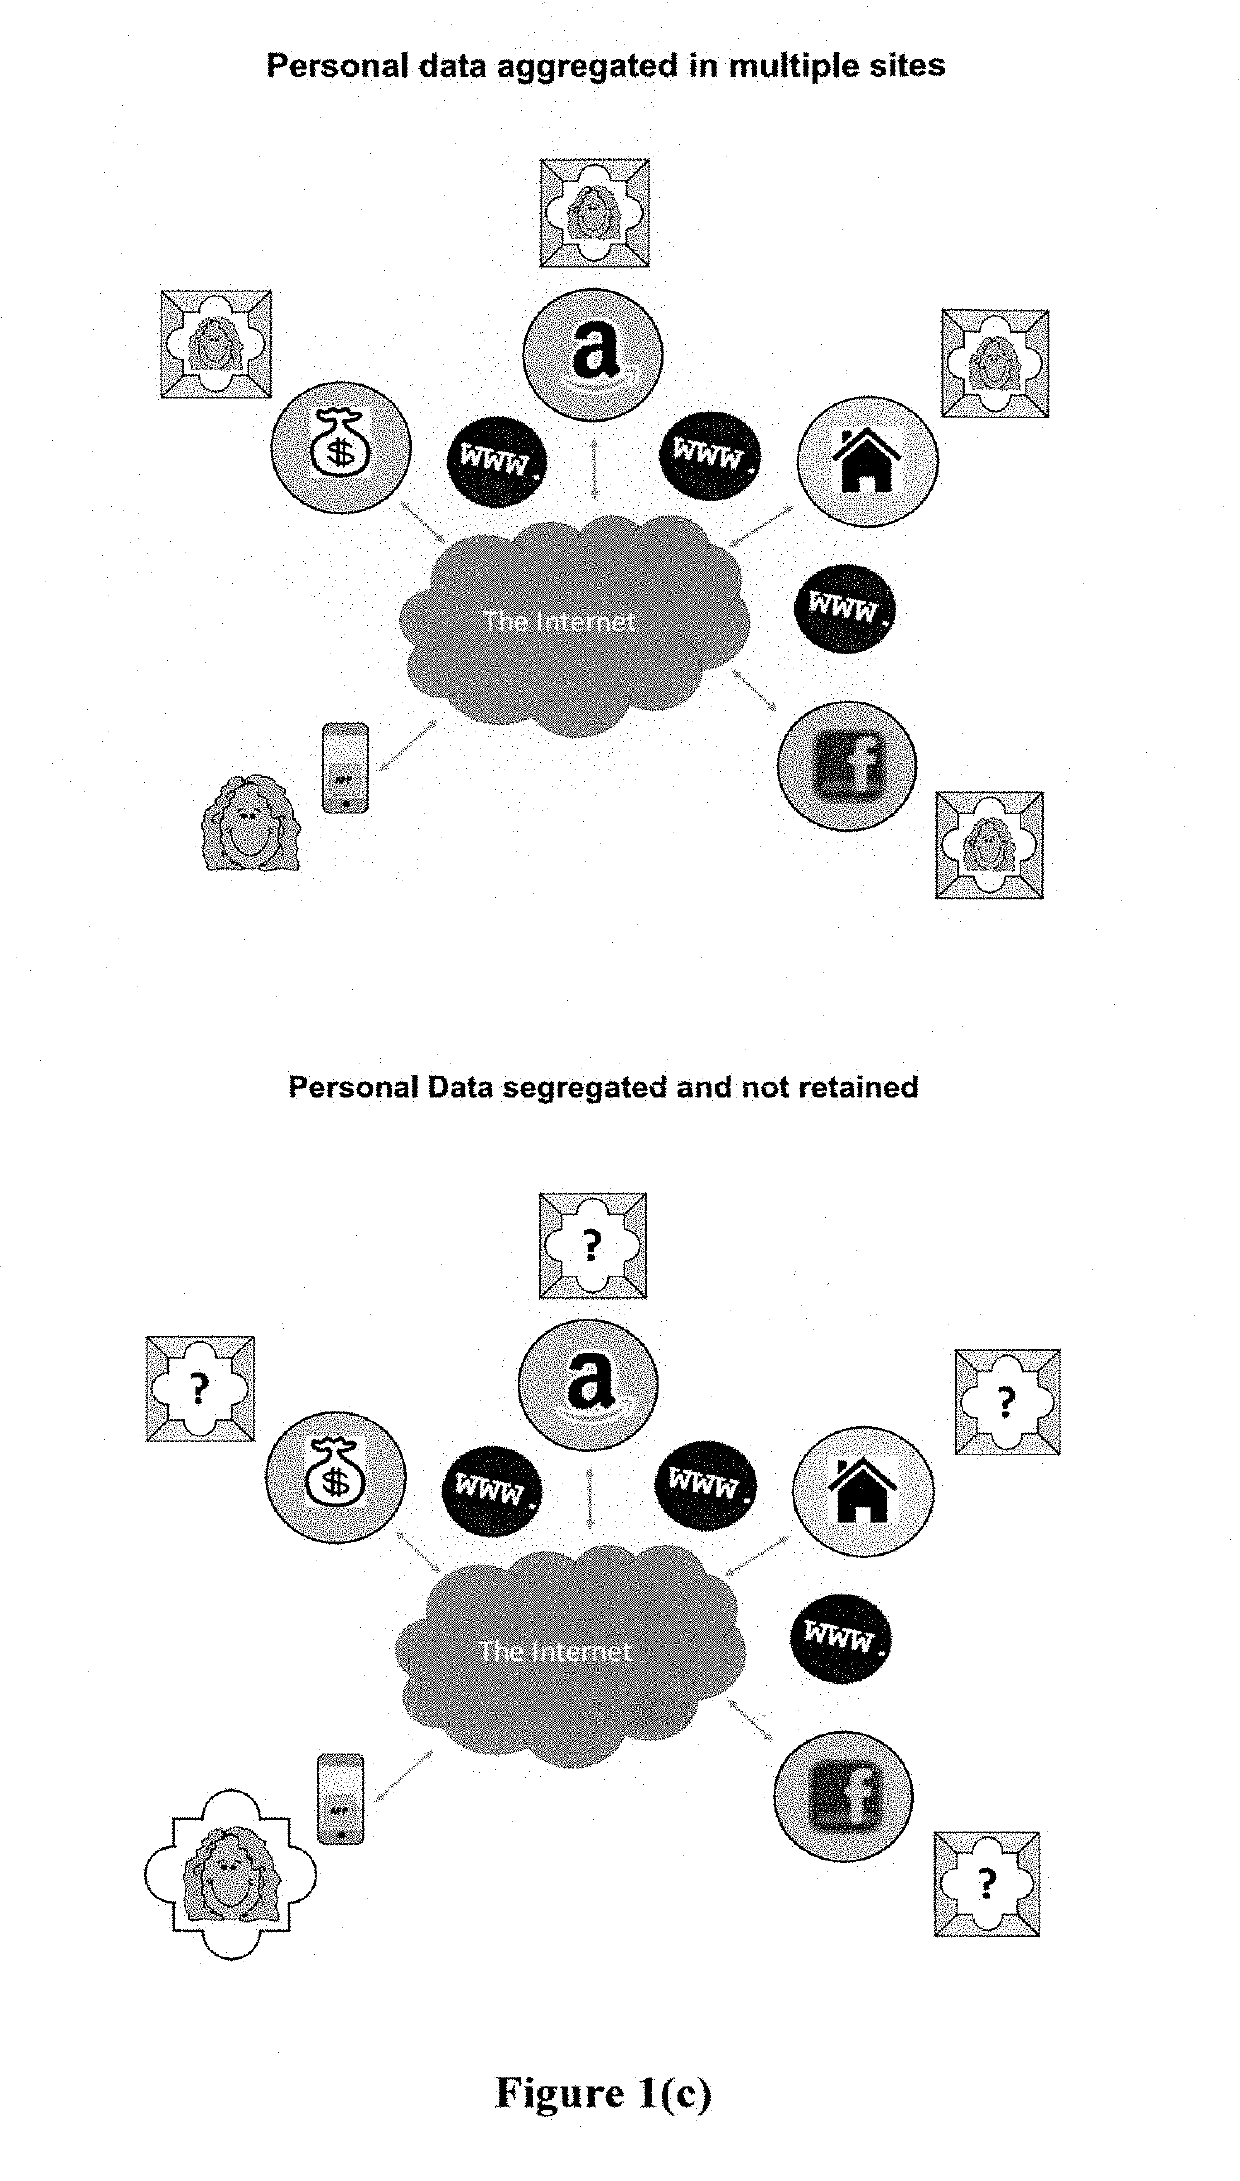 System for verification of pseudonymous credentials for digital identities with managed access to personal data on trust networks